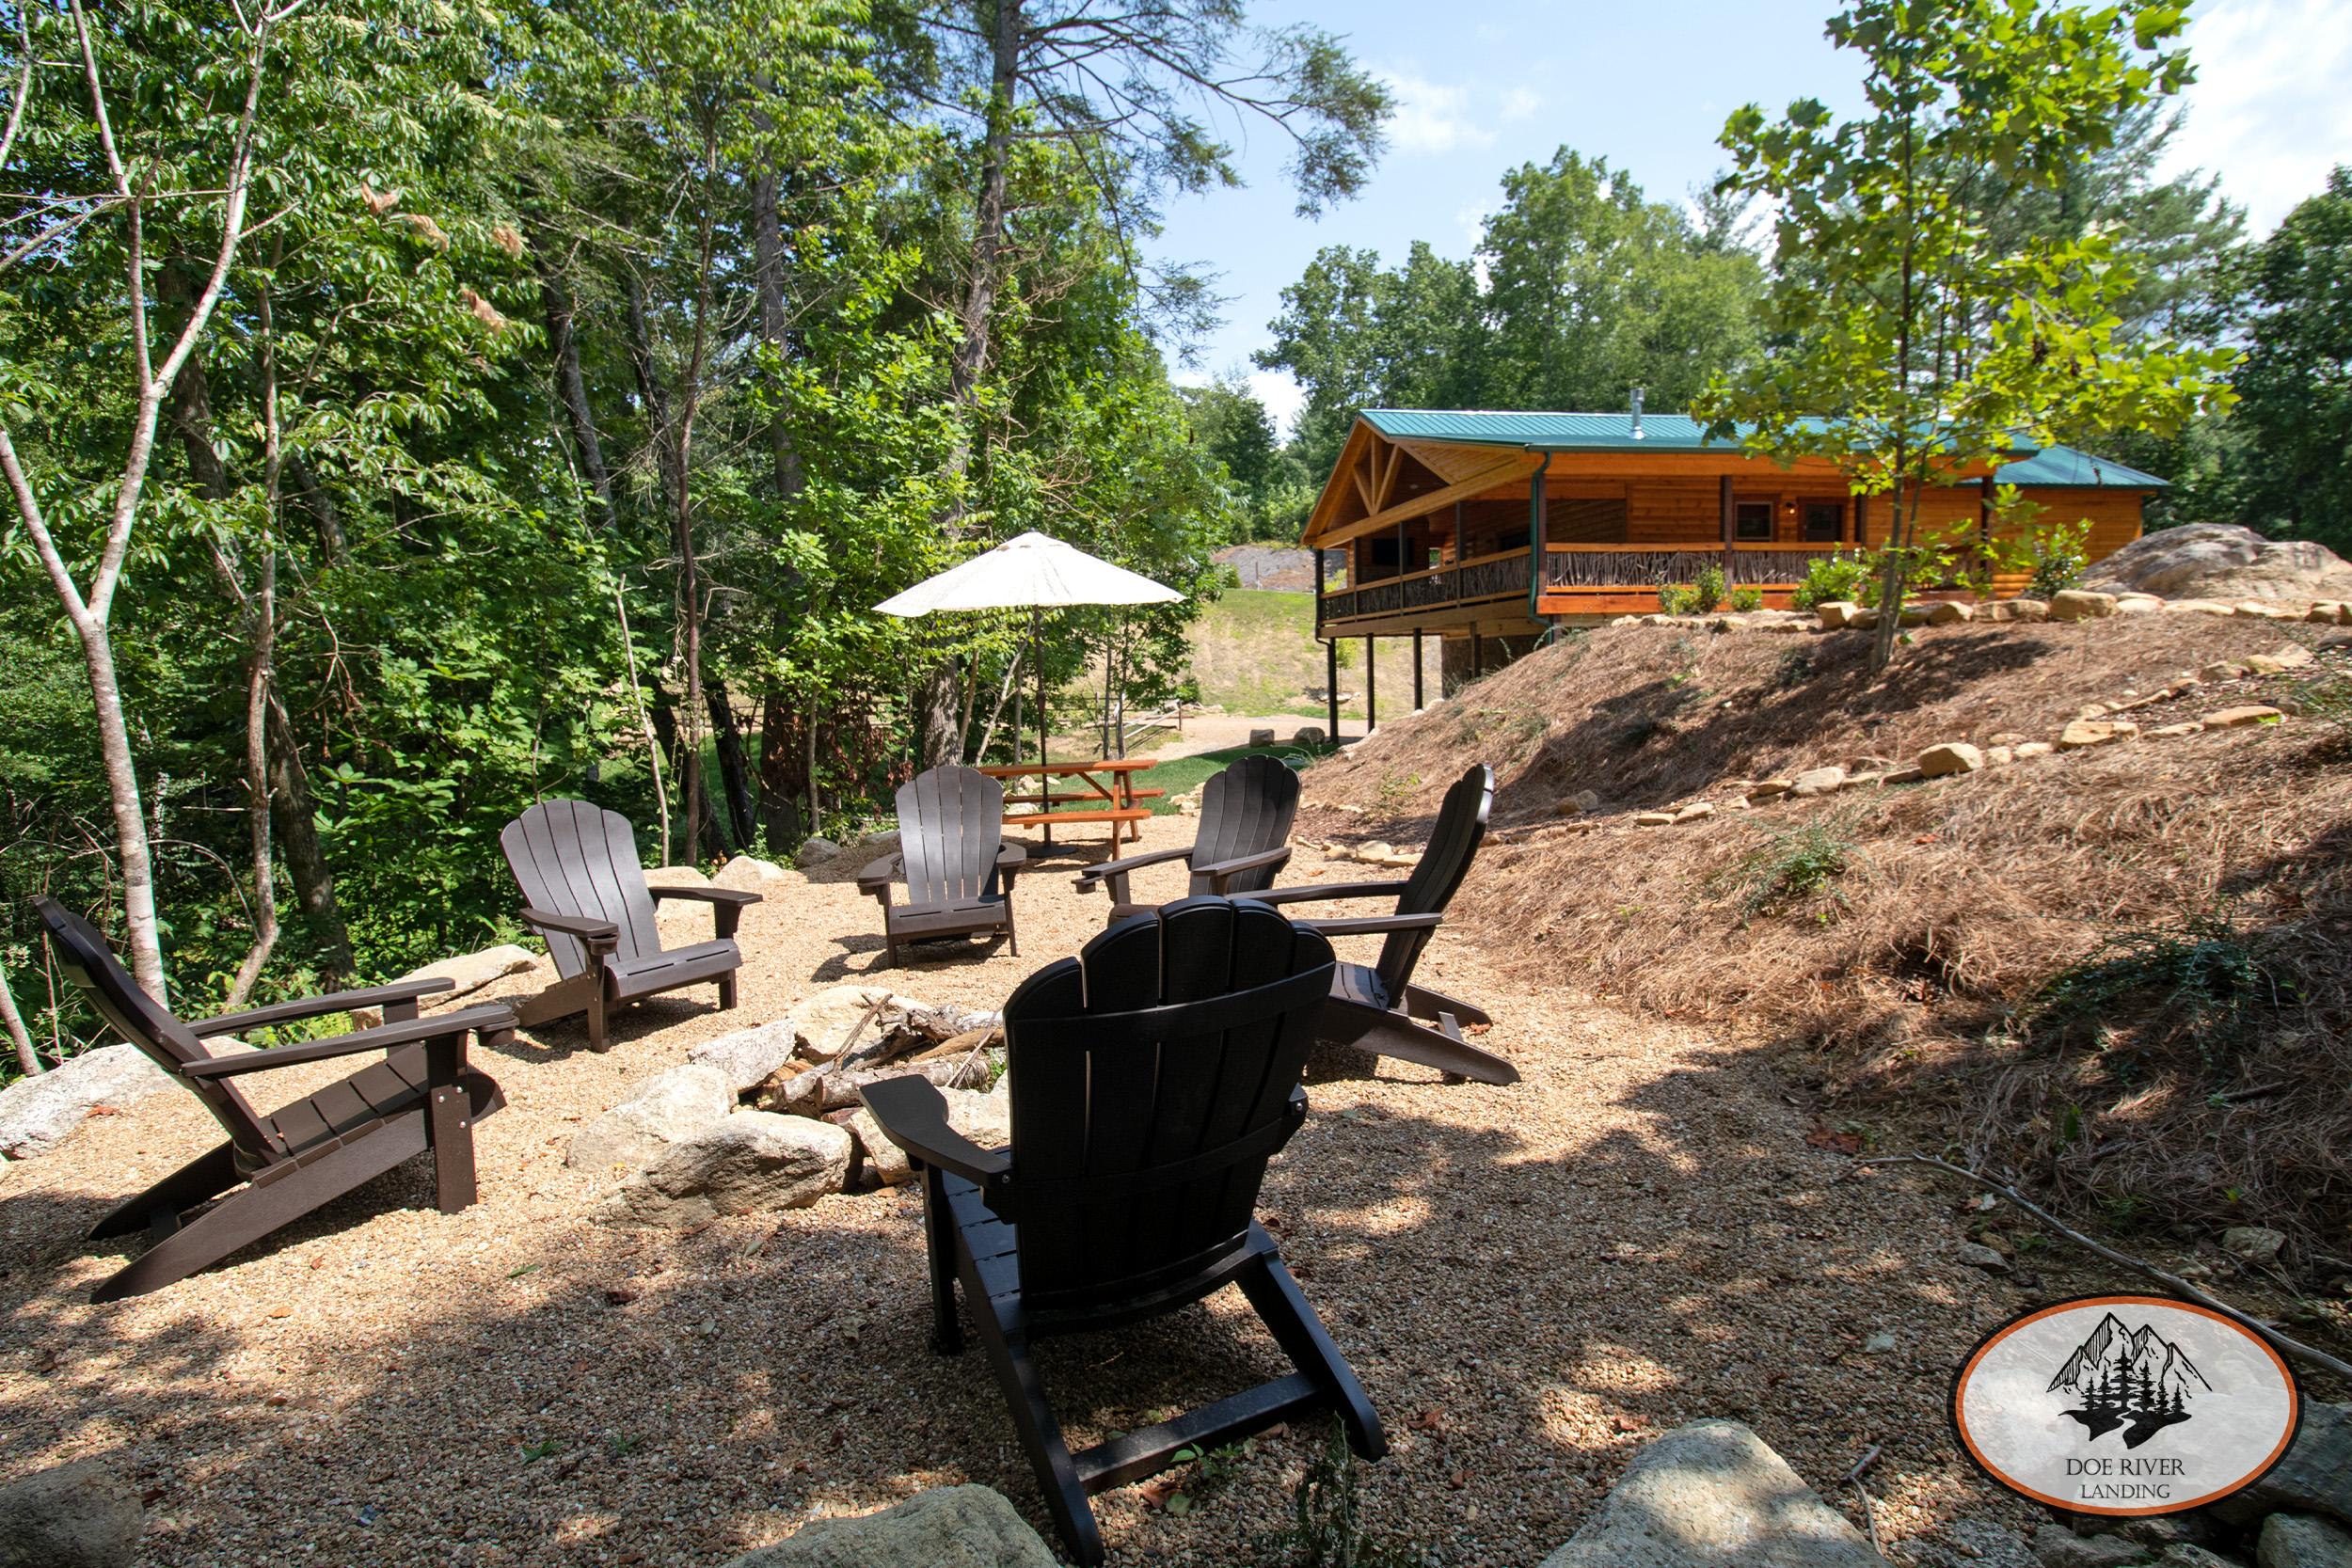 Doe River Landing campground in Roan Mountain, TN. Best vacation rental near Elizabethton, TN and Johnson City TN. Bear Cub Cabin private riverfront campsite with fire pit, picnic table, and umbrella.